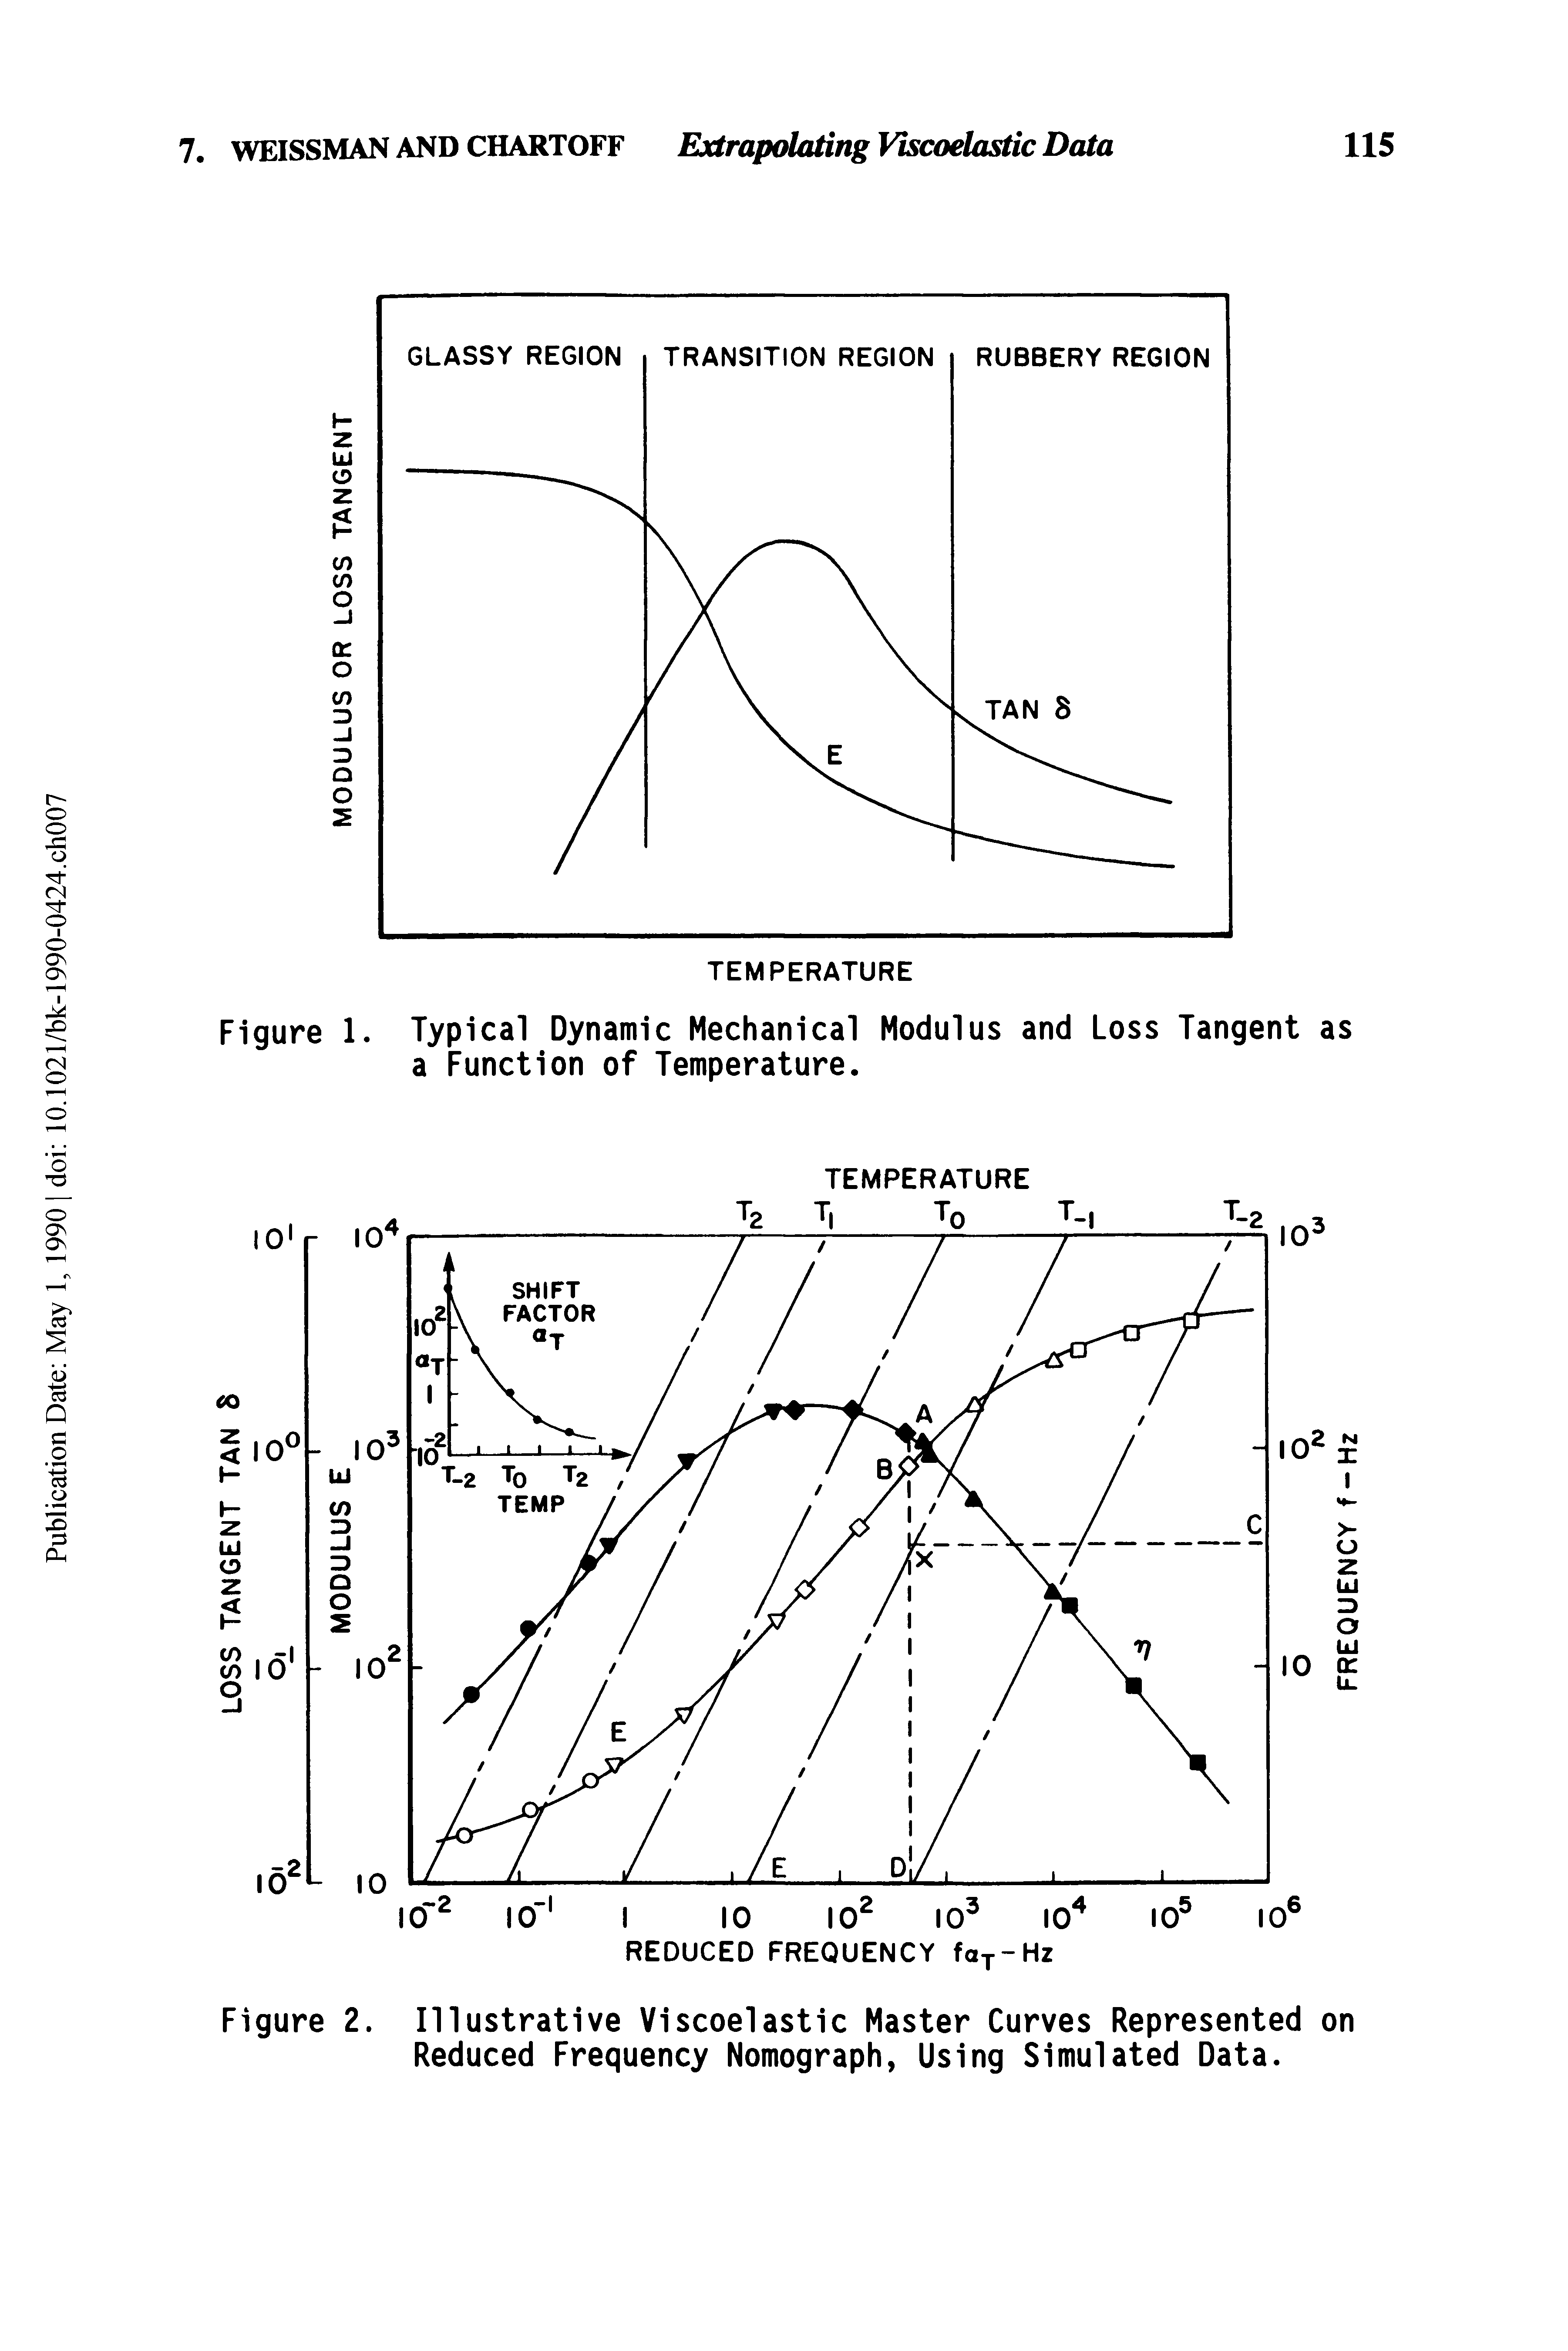 Figure 1. Typical Dynamic Mechanical Modulus and Loss Tangent a Function of Temperature.